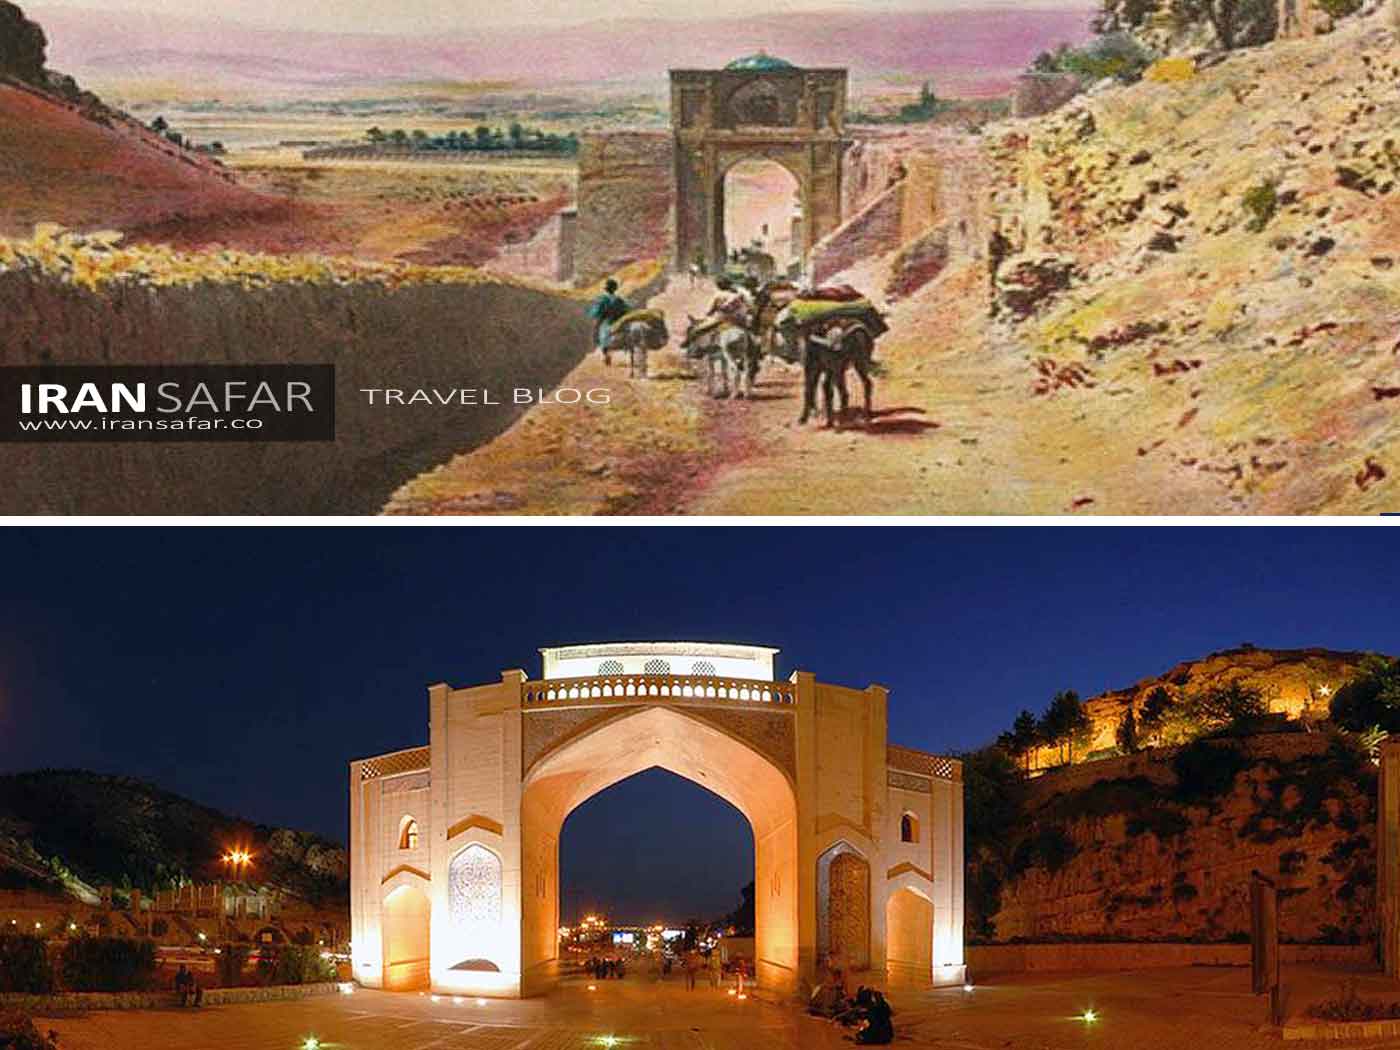 Quran Gate of Shiraz, now and then 